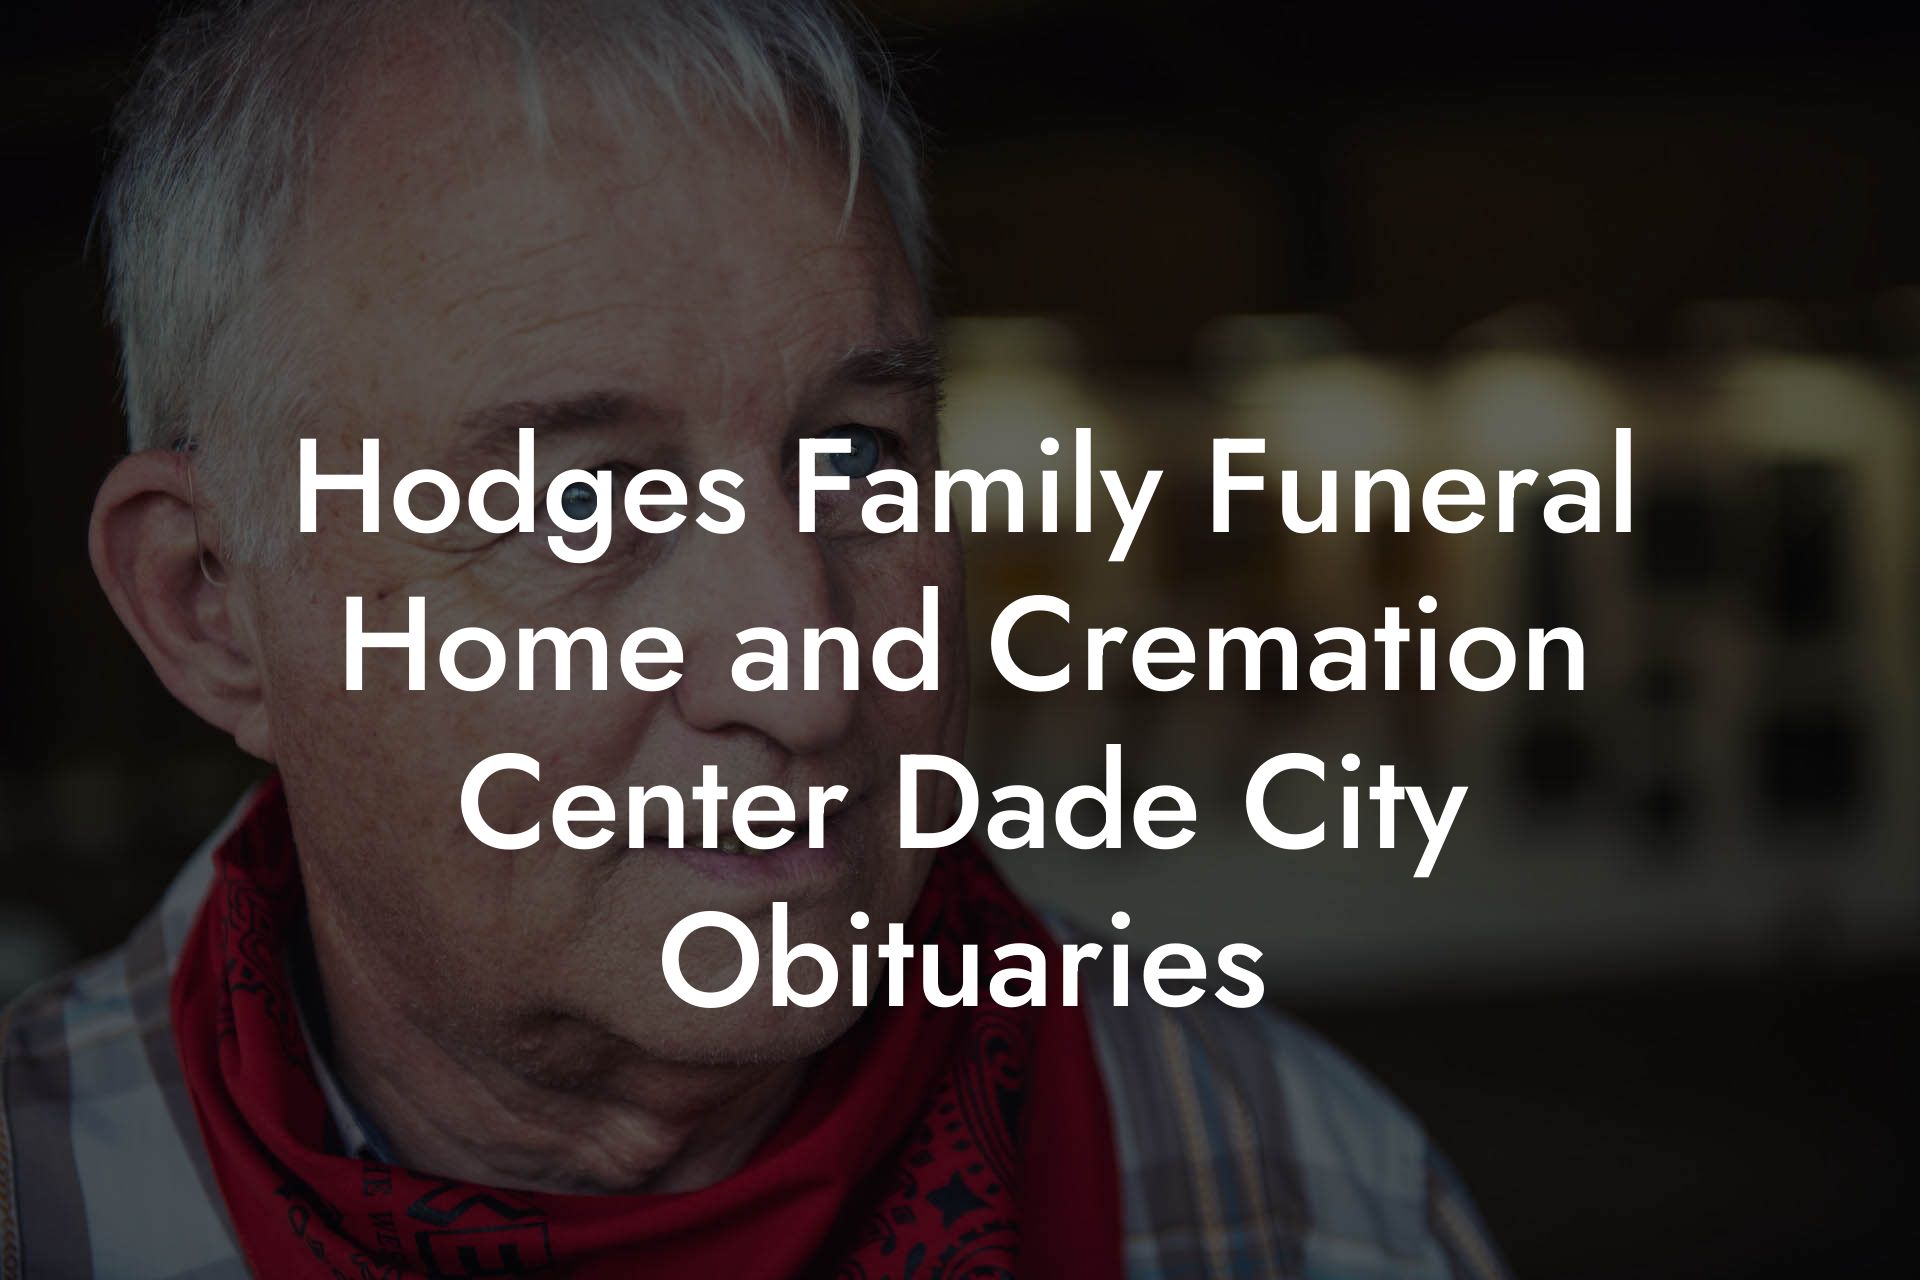 Hodges Family Funeral Home and Cremation Center Dade City Obituaries